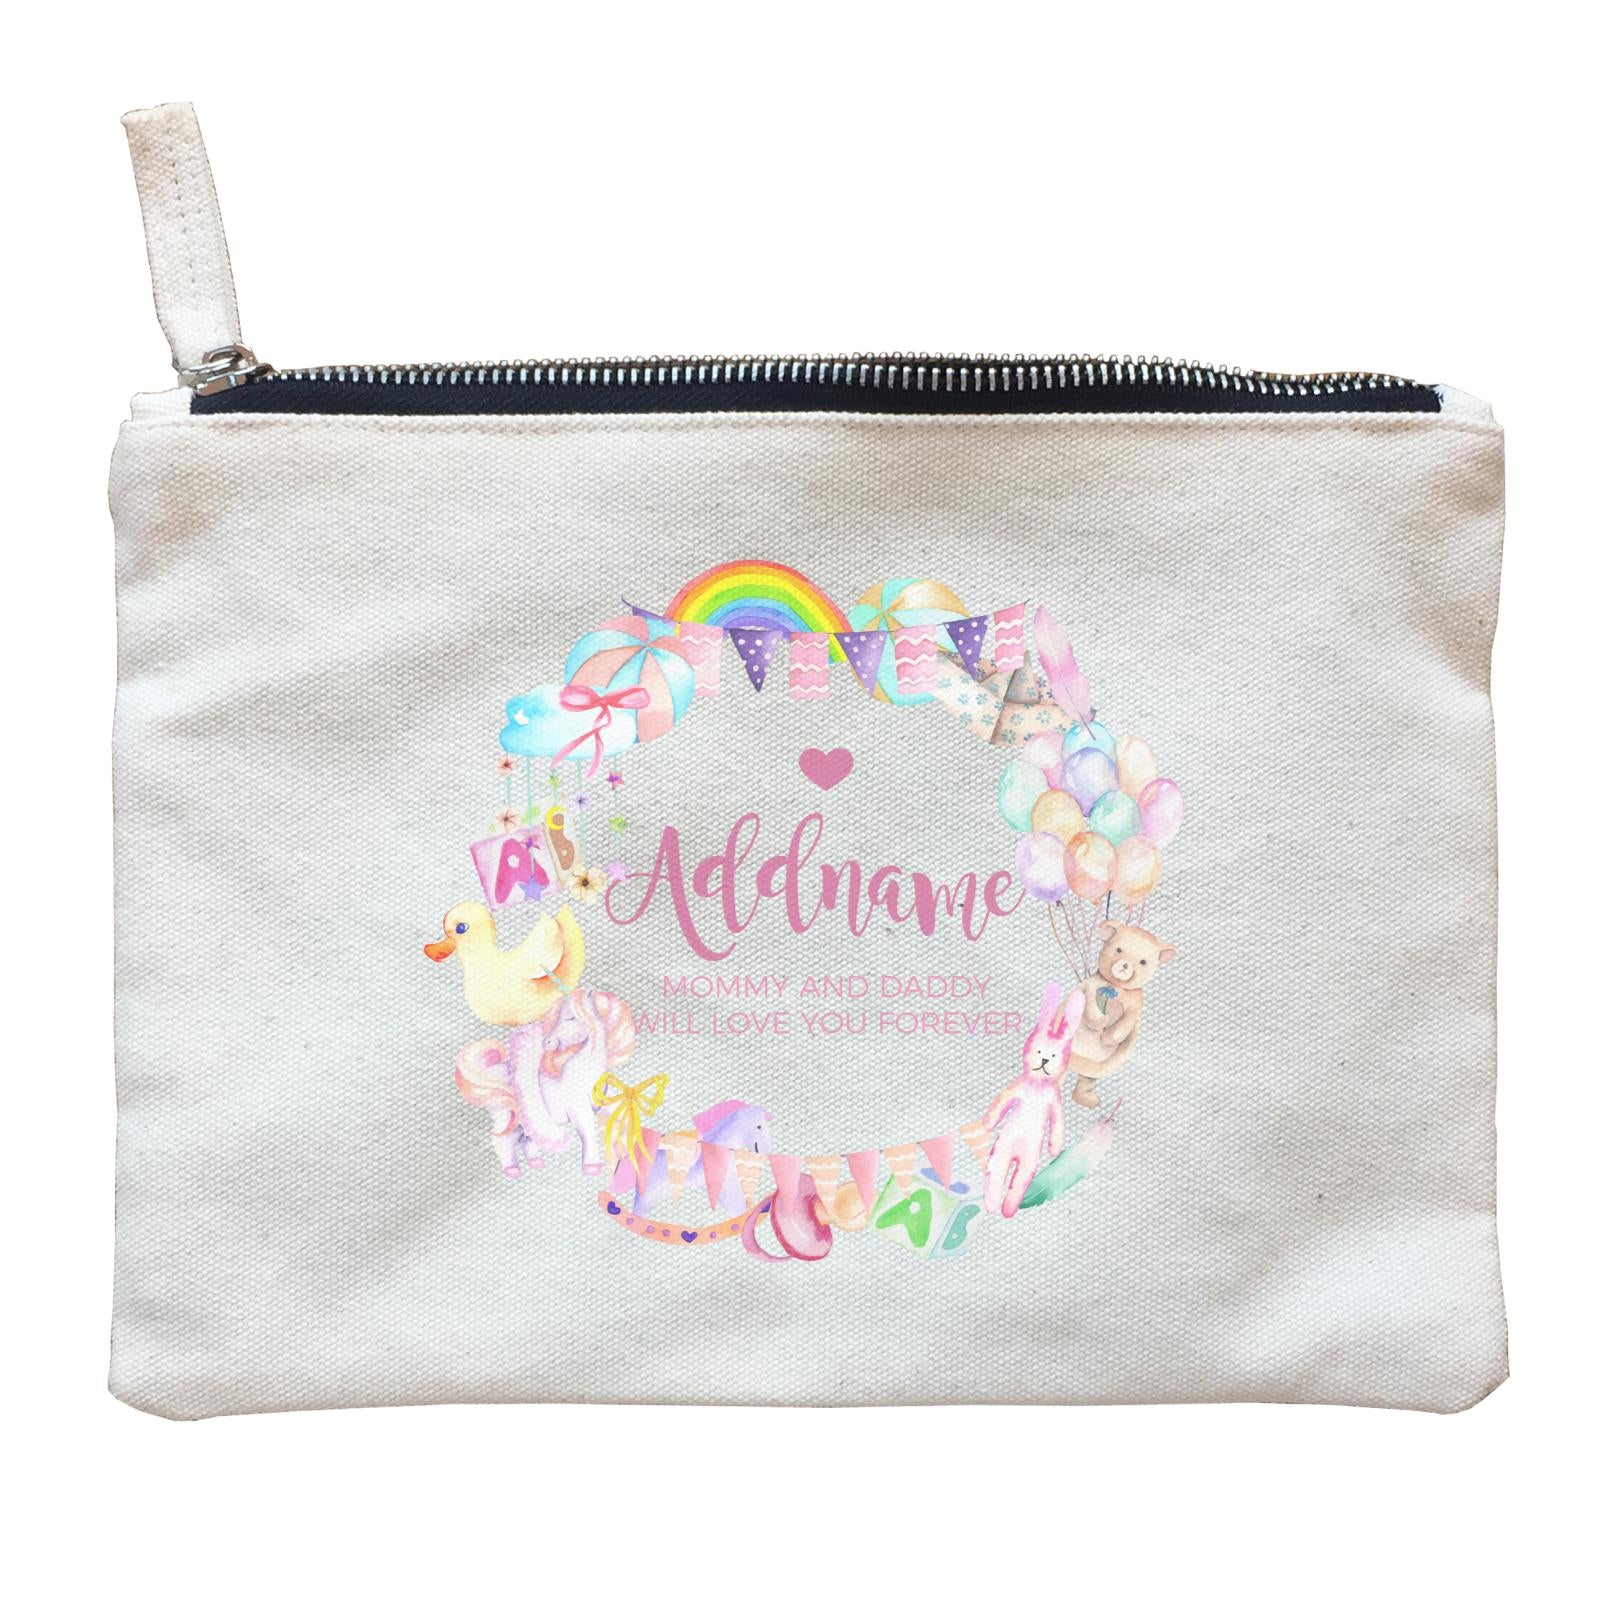 Watercolour Magical Girlish Creatures and Elements Personalizable with Name and Text Zipper Pouch